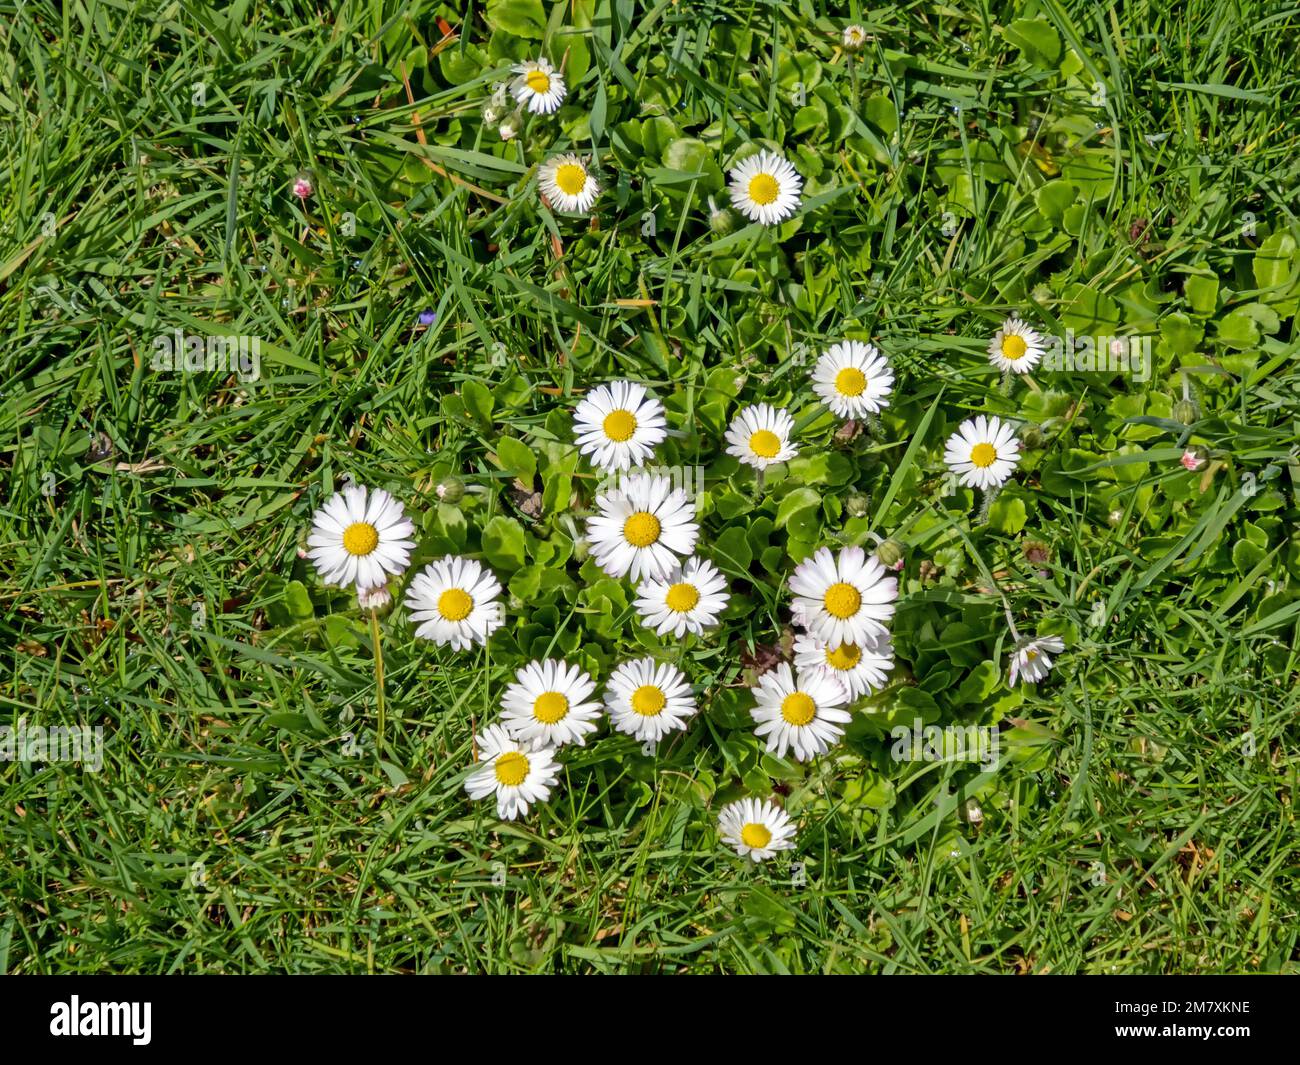 Several white flowering daisies ( Bellis perennis) on a meadow Stock Photo